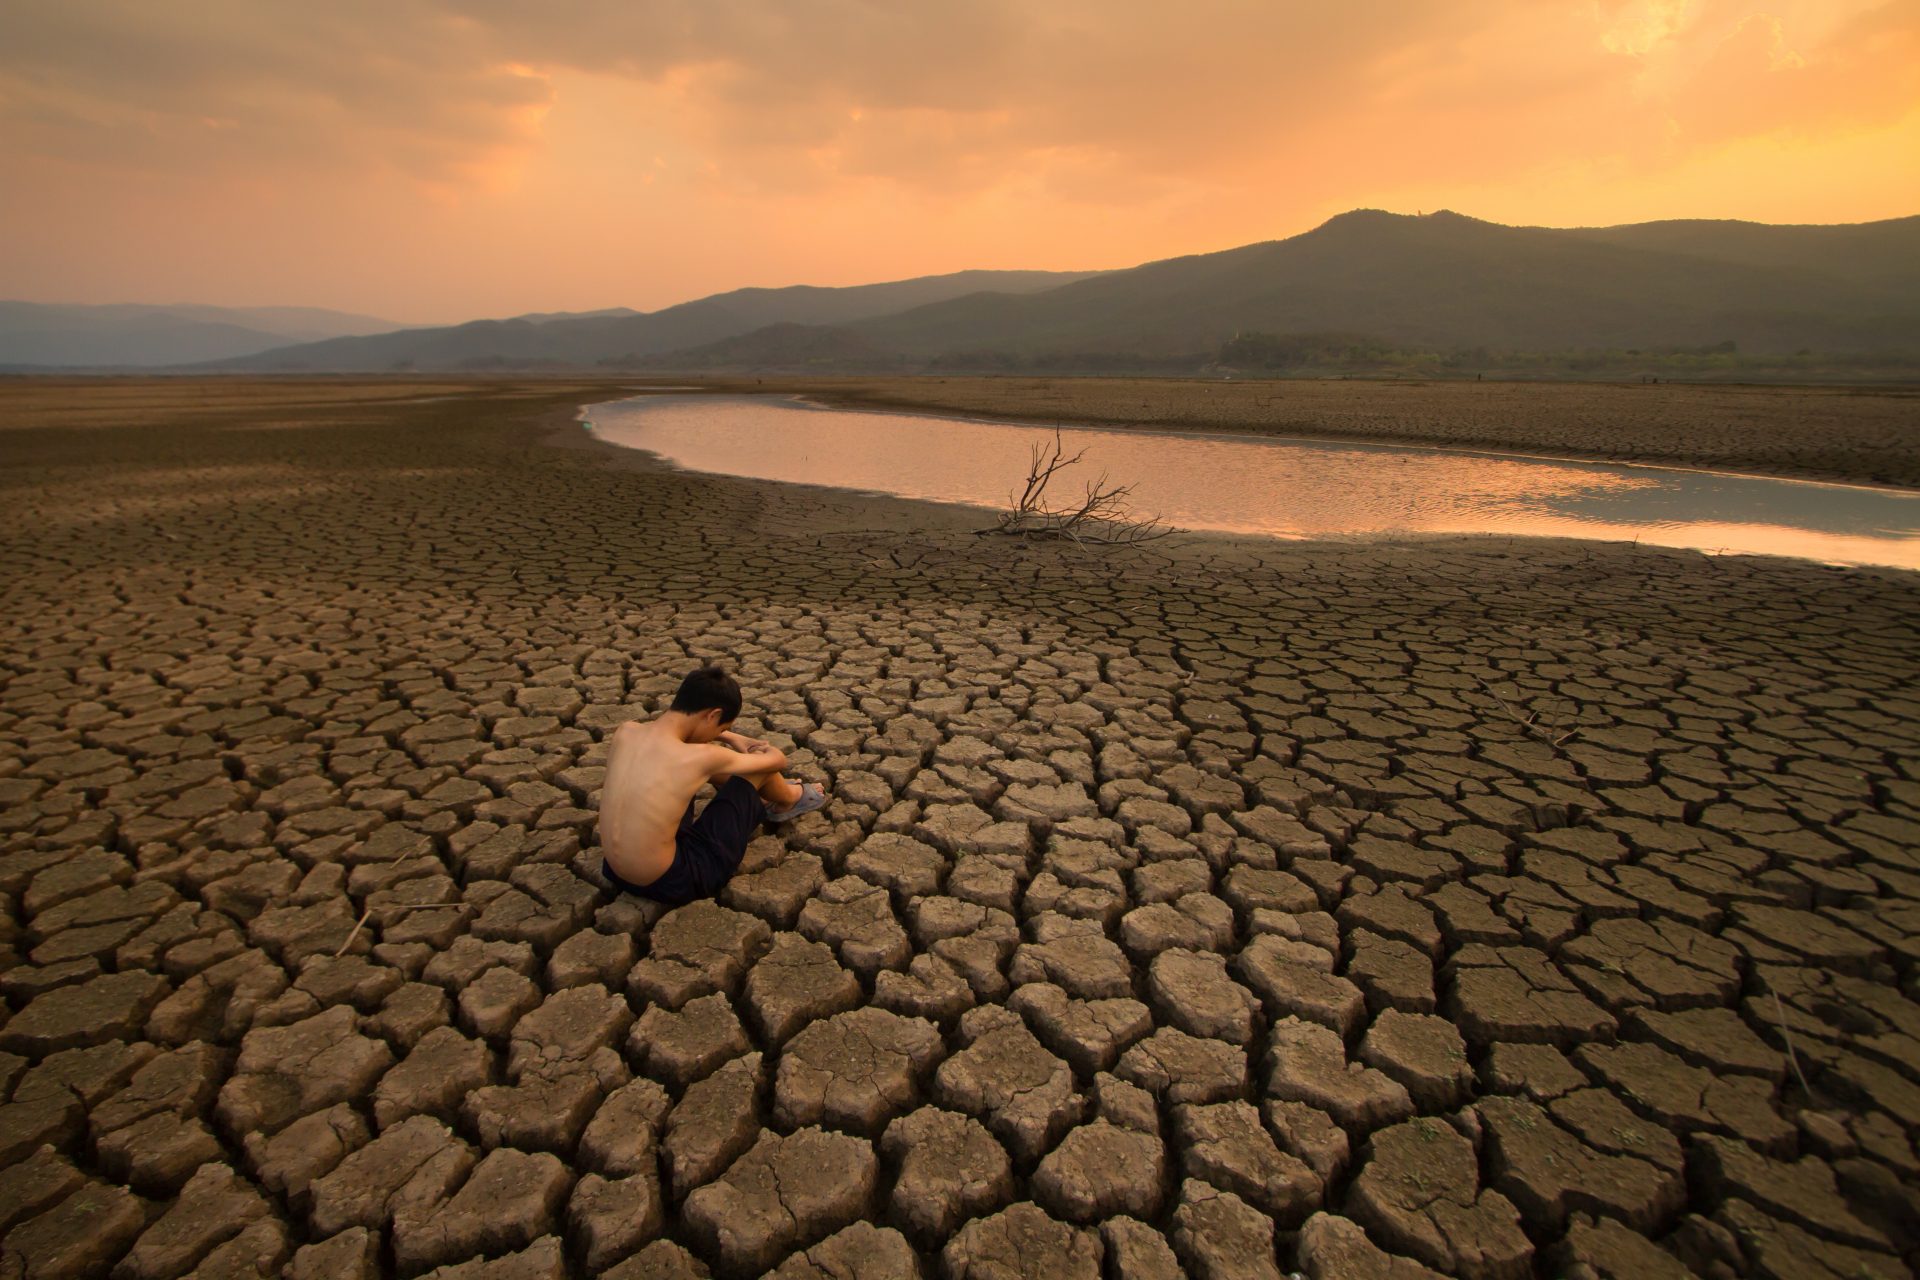 Sad Children or young man sitting on cracked earth near drying river metaphor water crisis, climate change